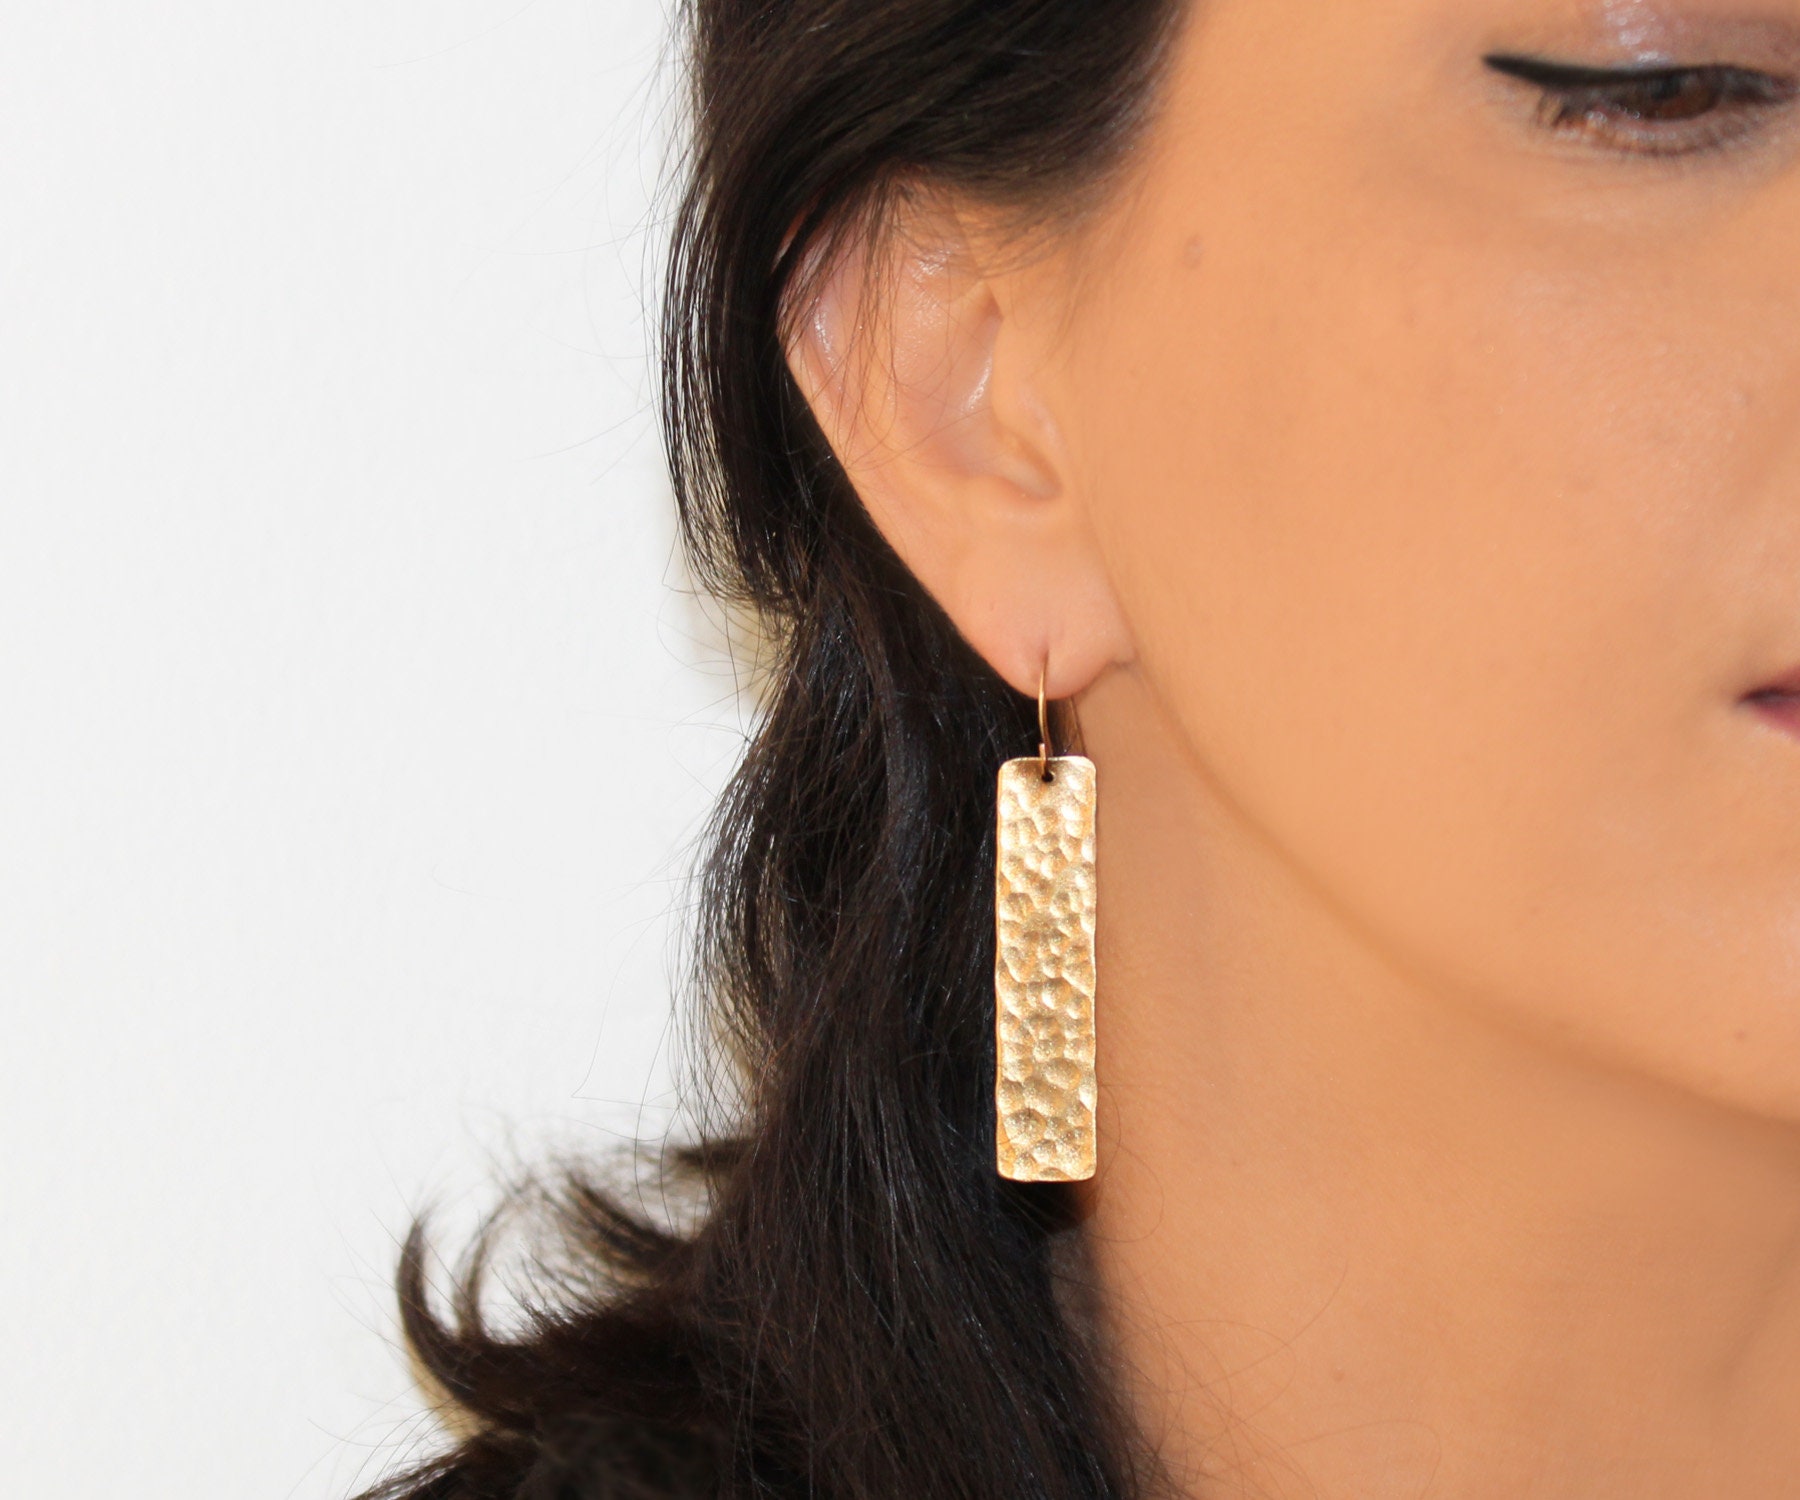 Details about   Chic Twisted and Hammered Rectangular Earrings Studs 